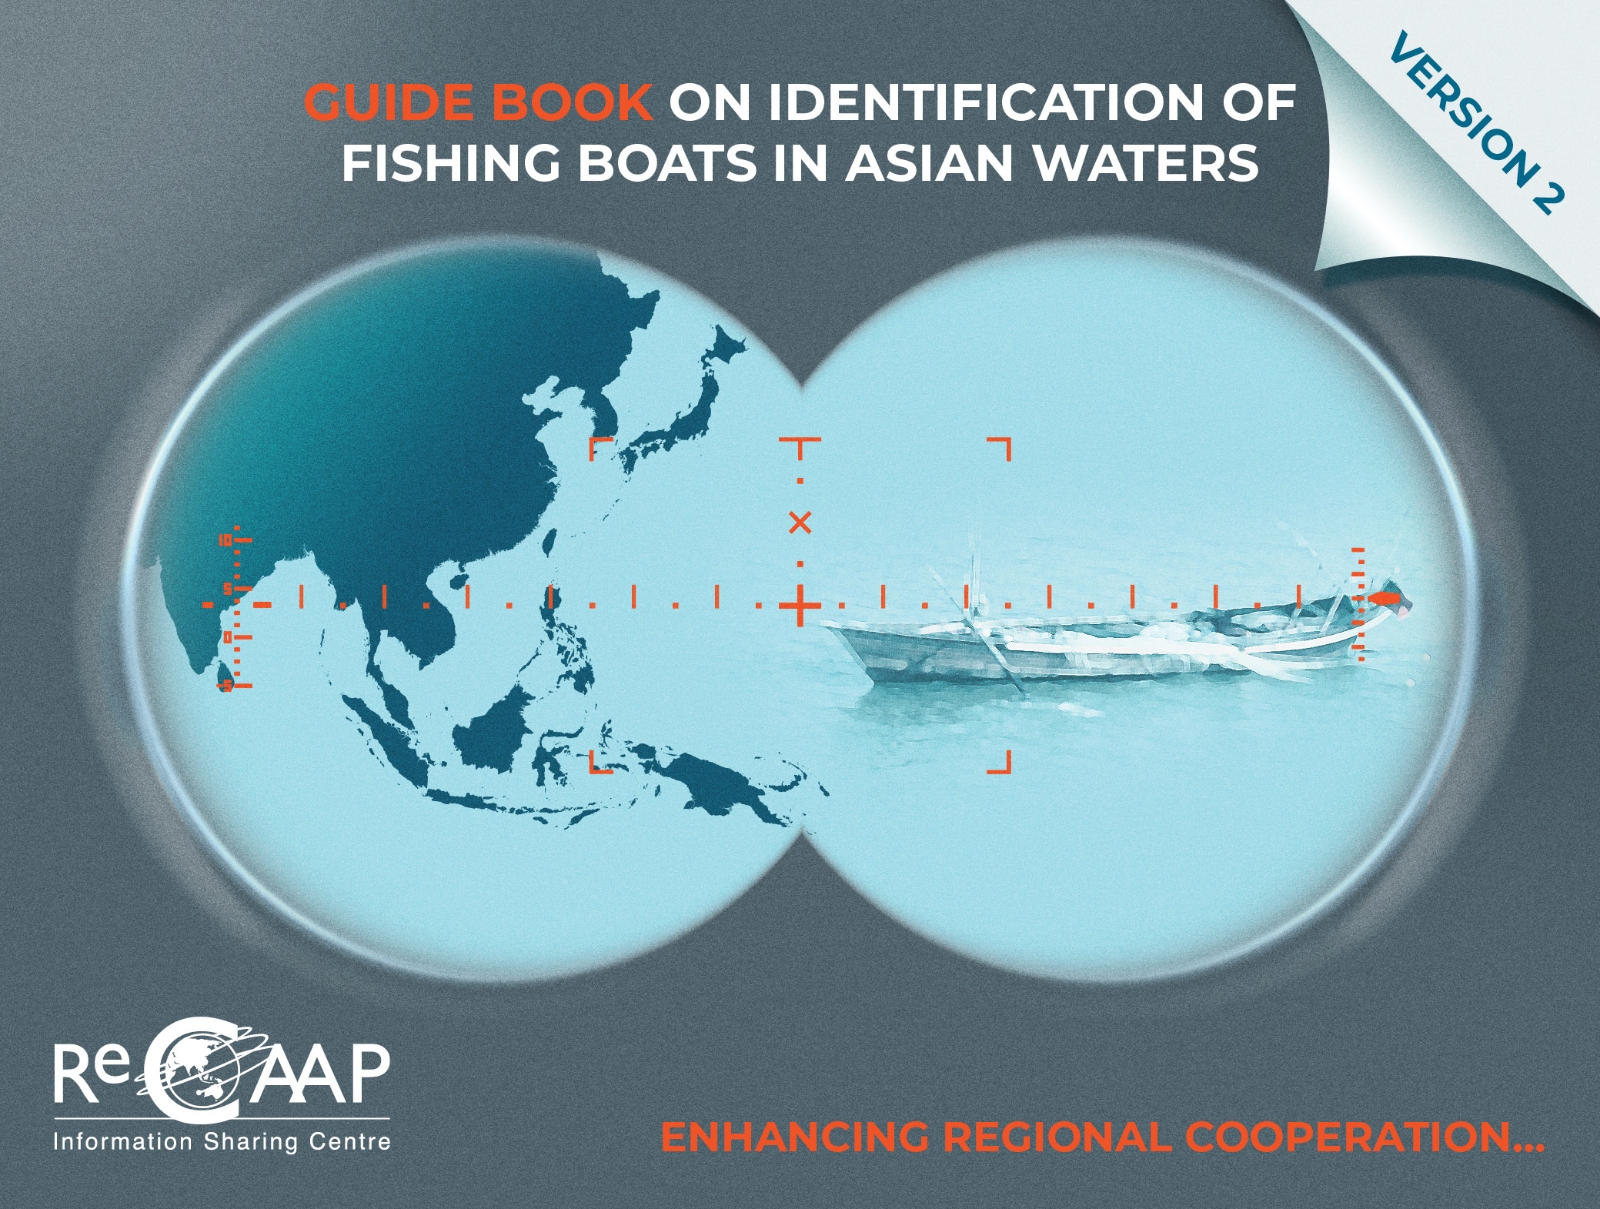 Guide Book on Identification of Fishing Boats in Asian Waters (Ver. 2)